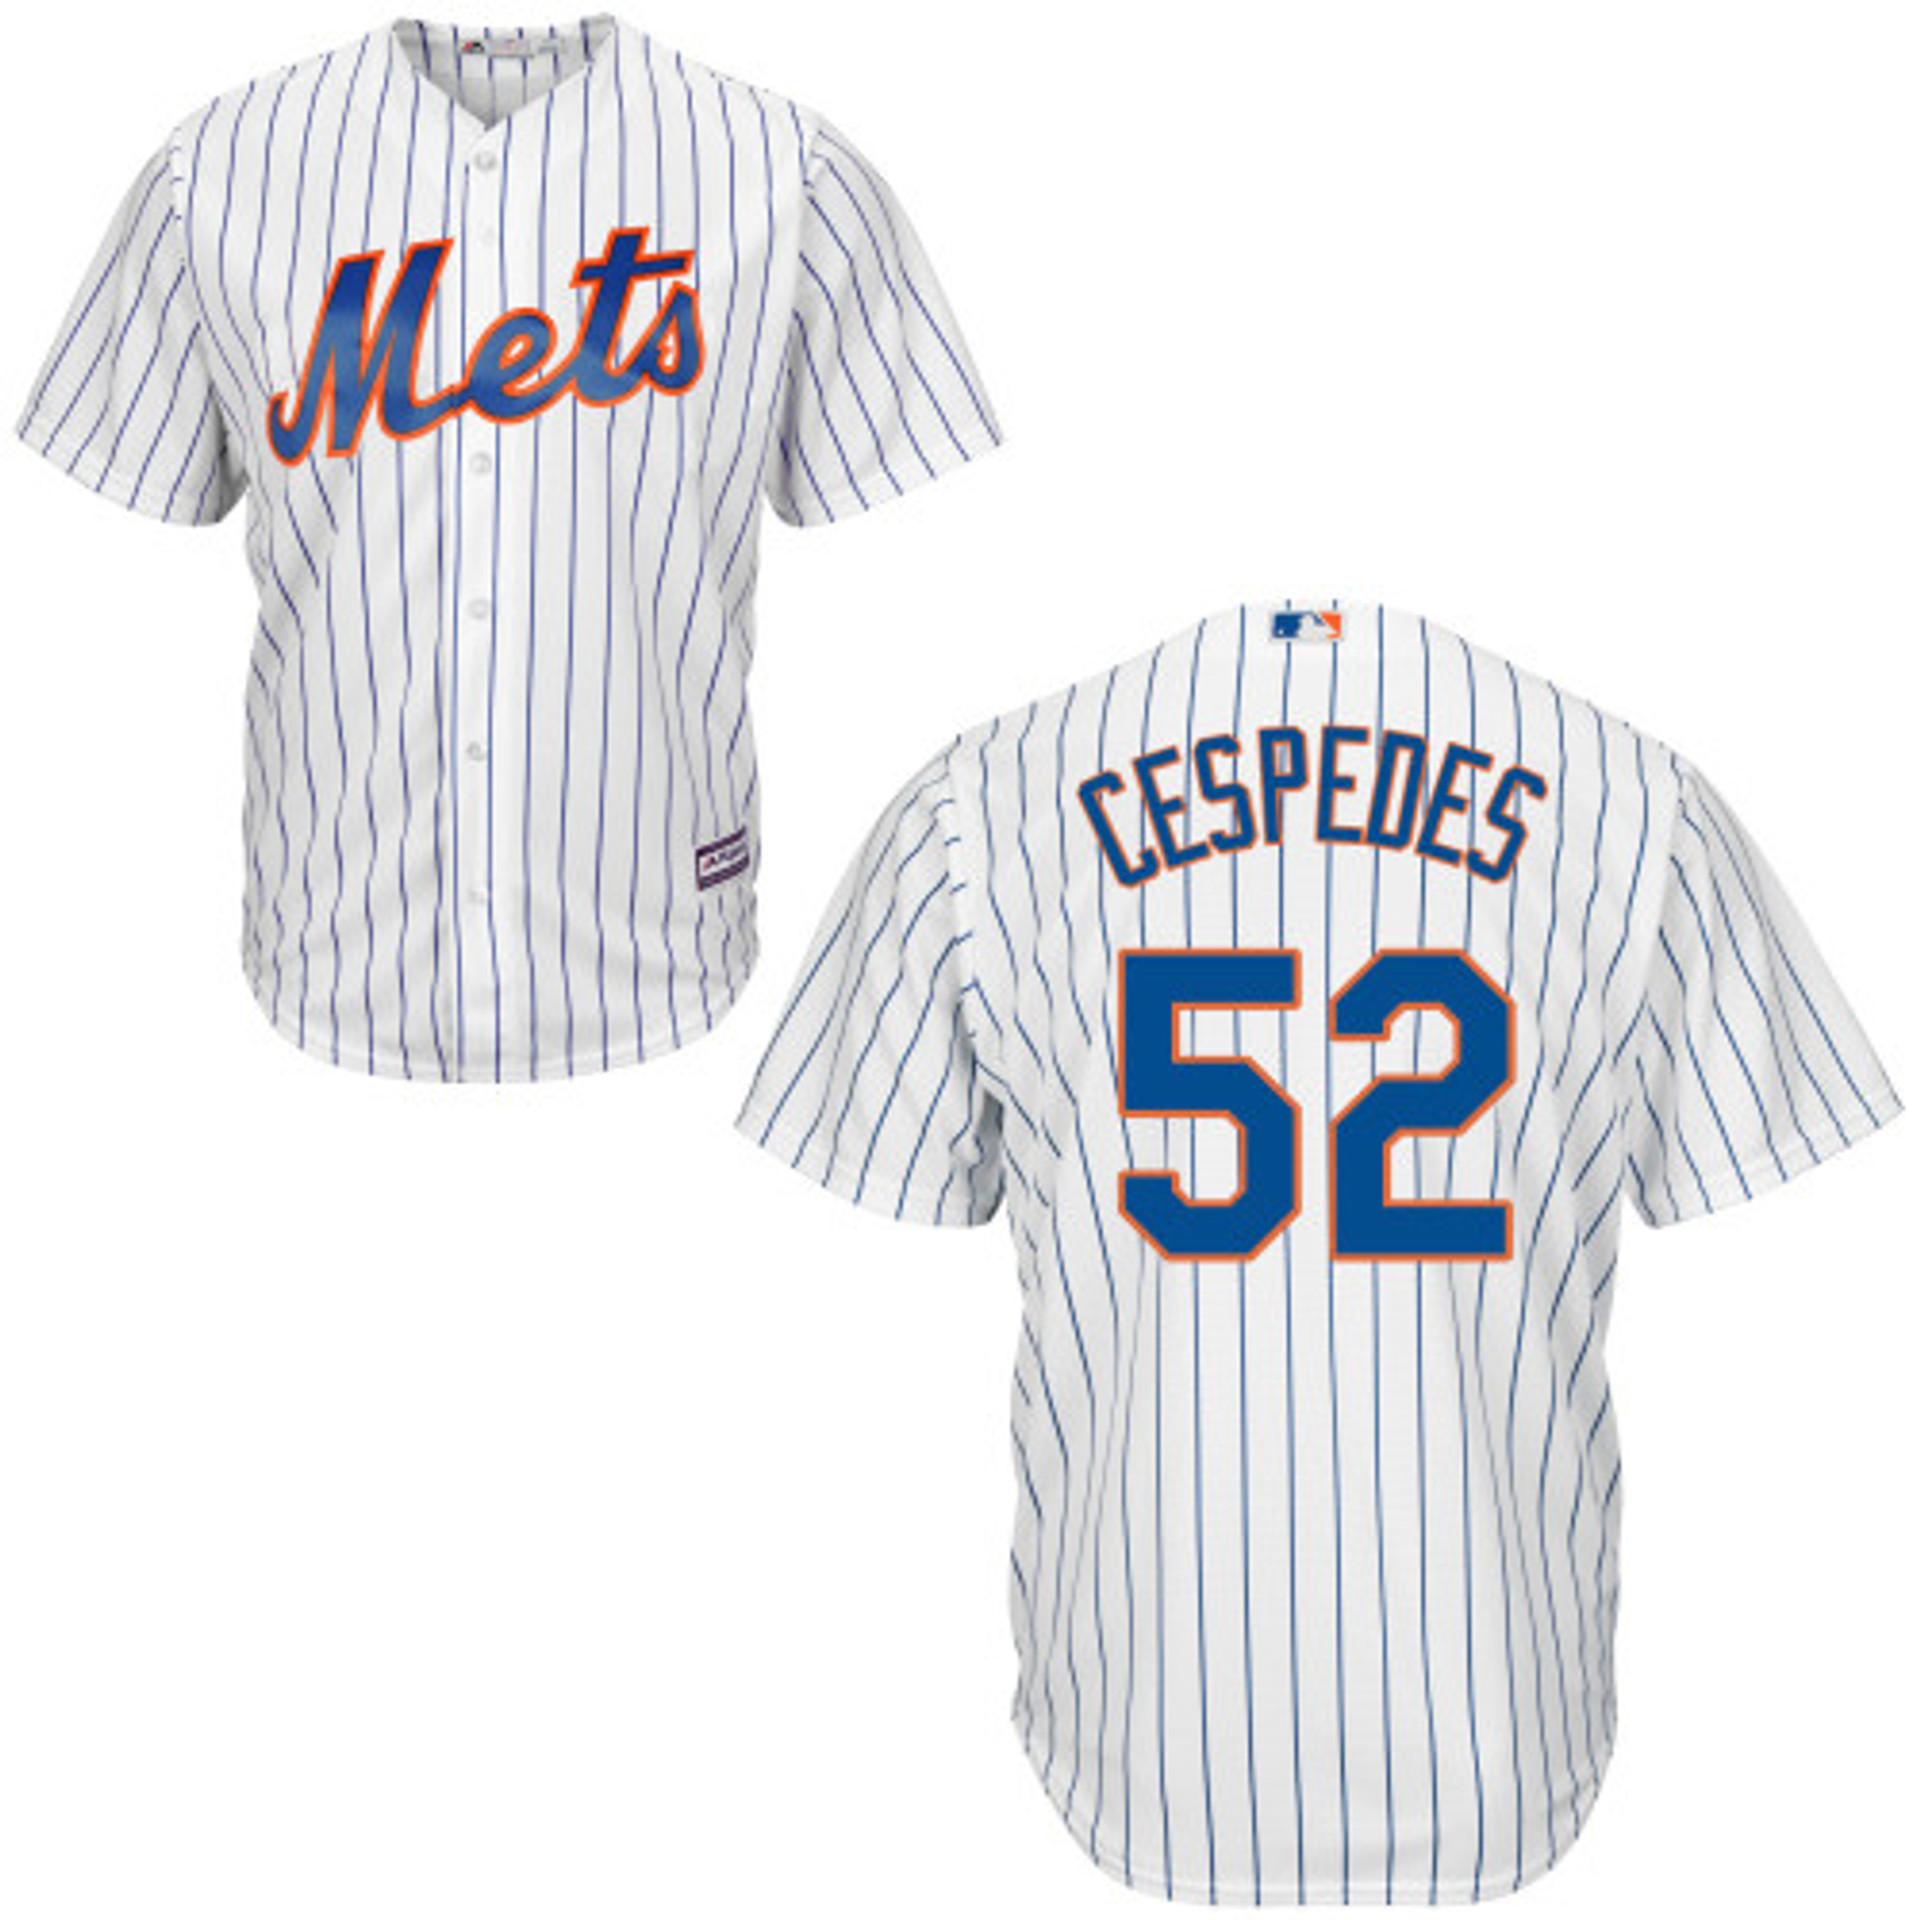 New York Mets Personalized Jerseys Customized Shirts with Any Name and ...